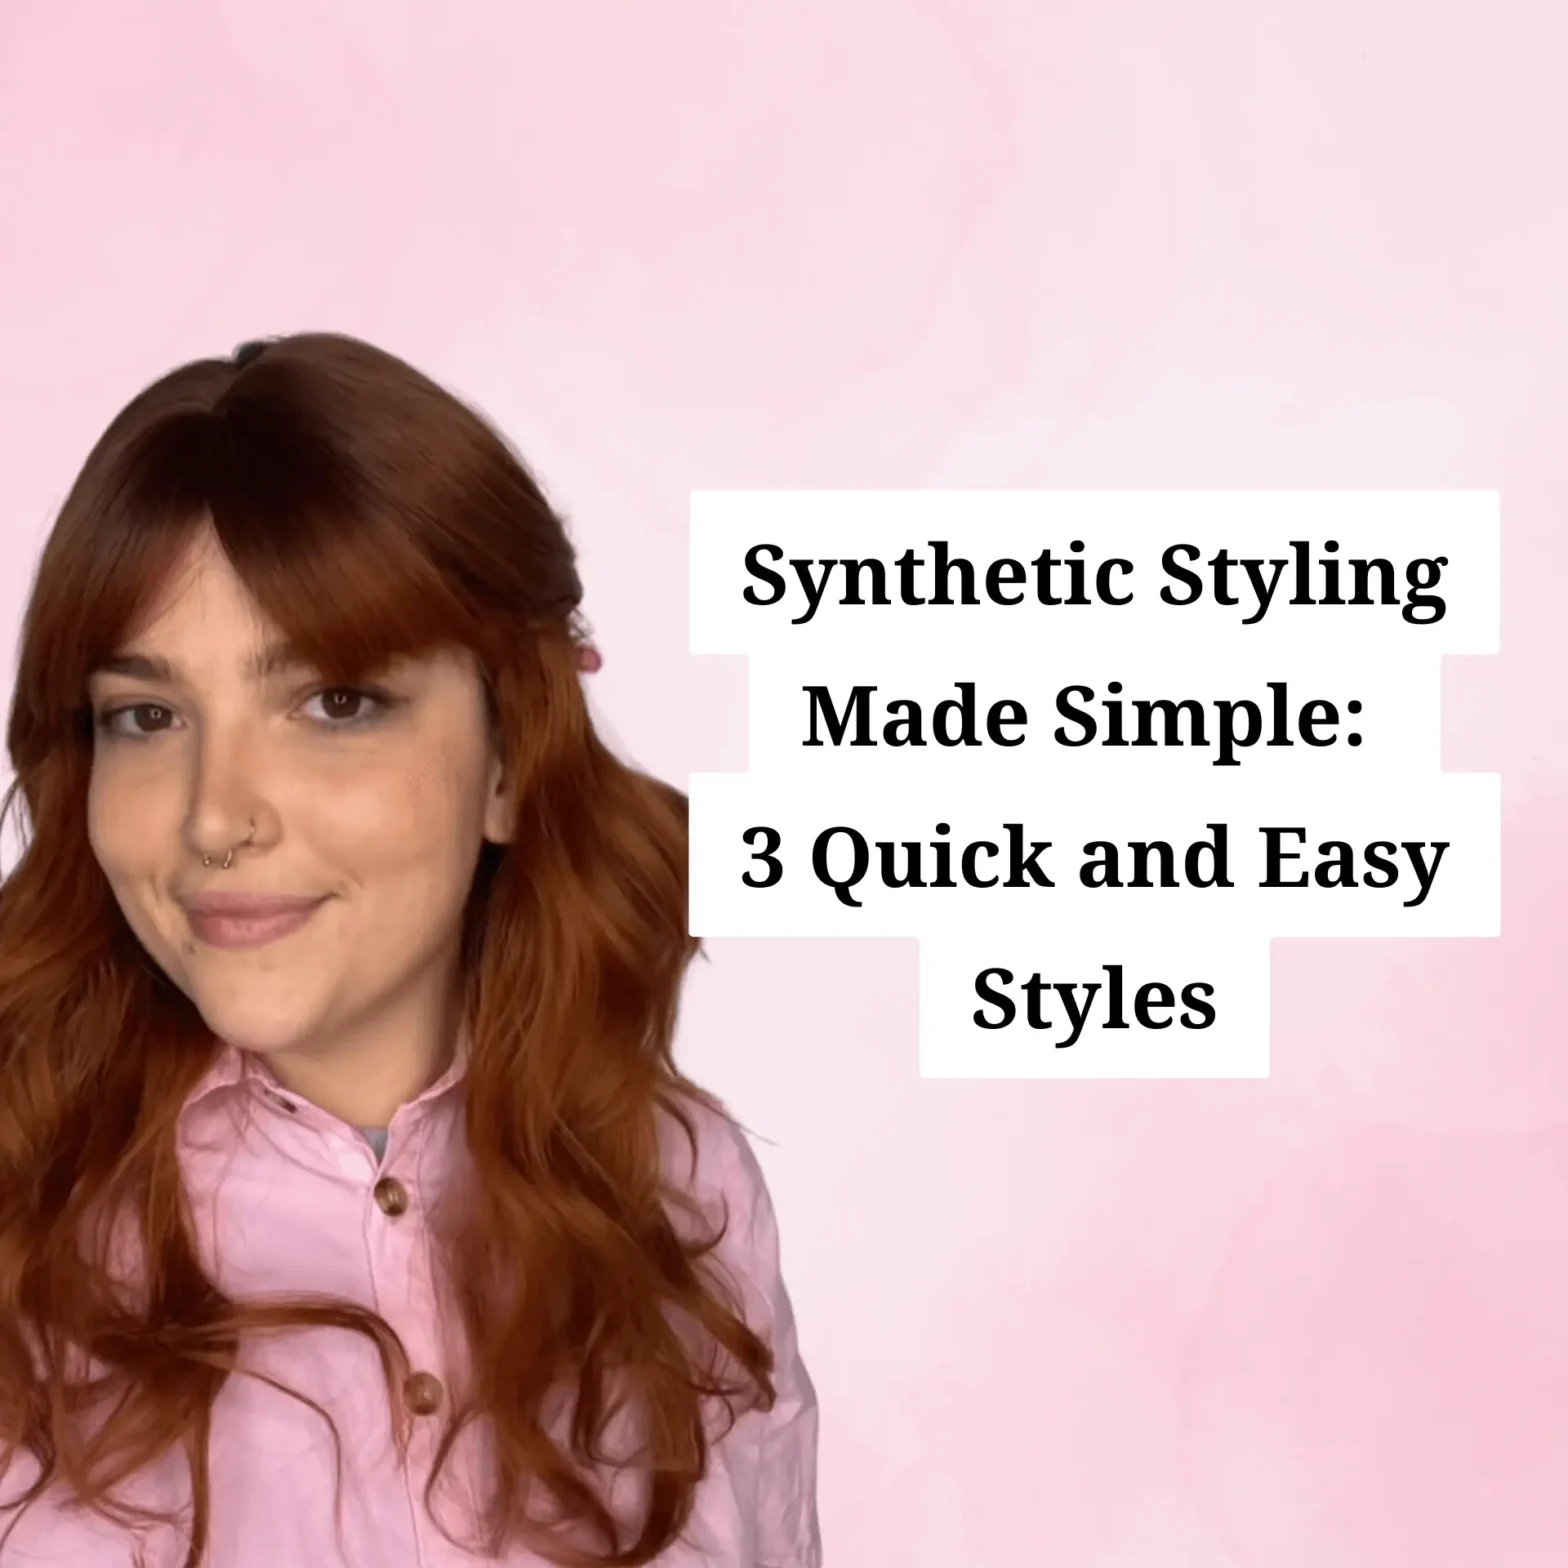 Synthetic Styling Made Simple 3 Quick and Easy Styles